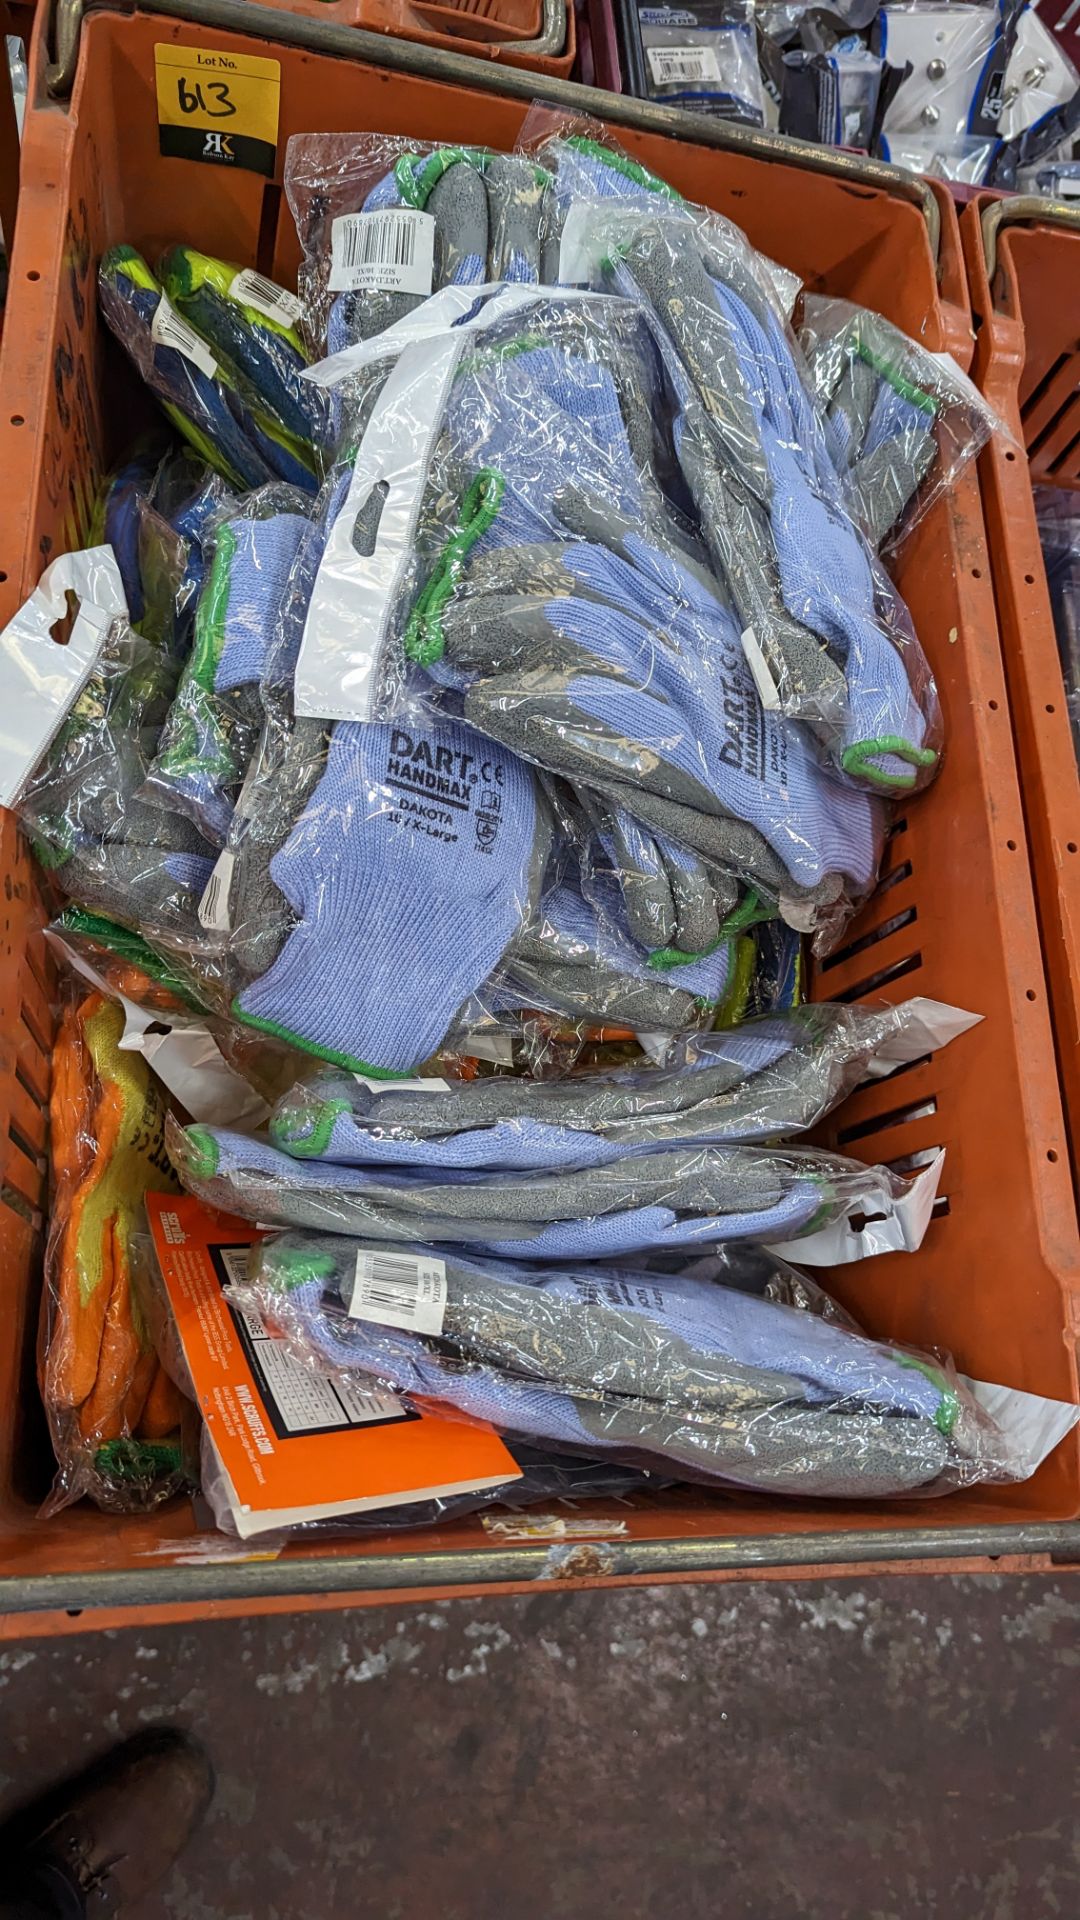 The contents of a crate of work gloves - Image 2 of 7